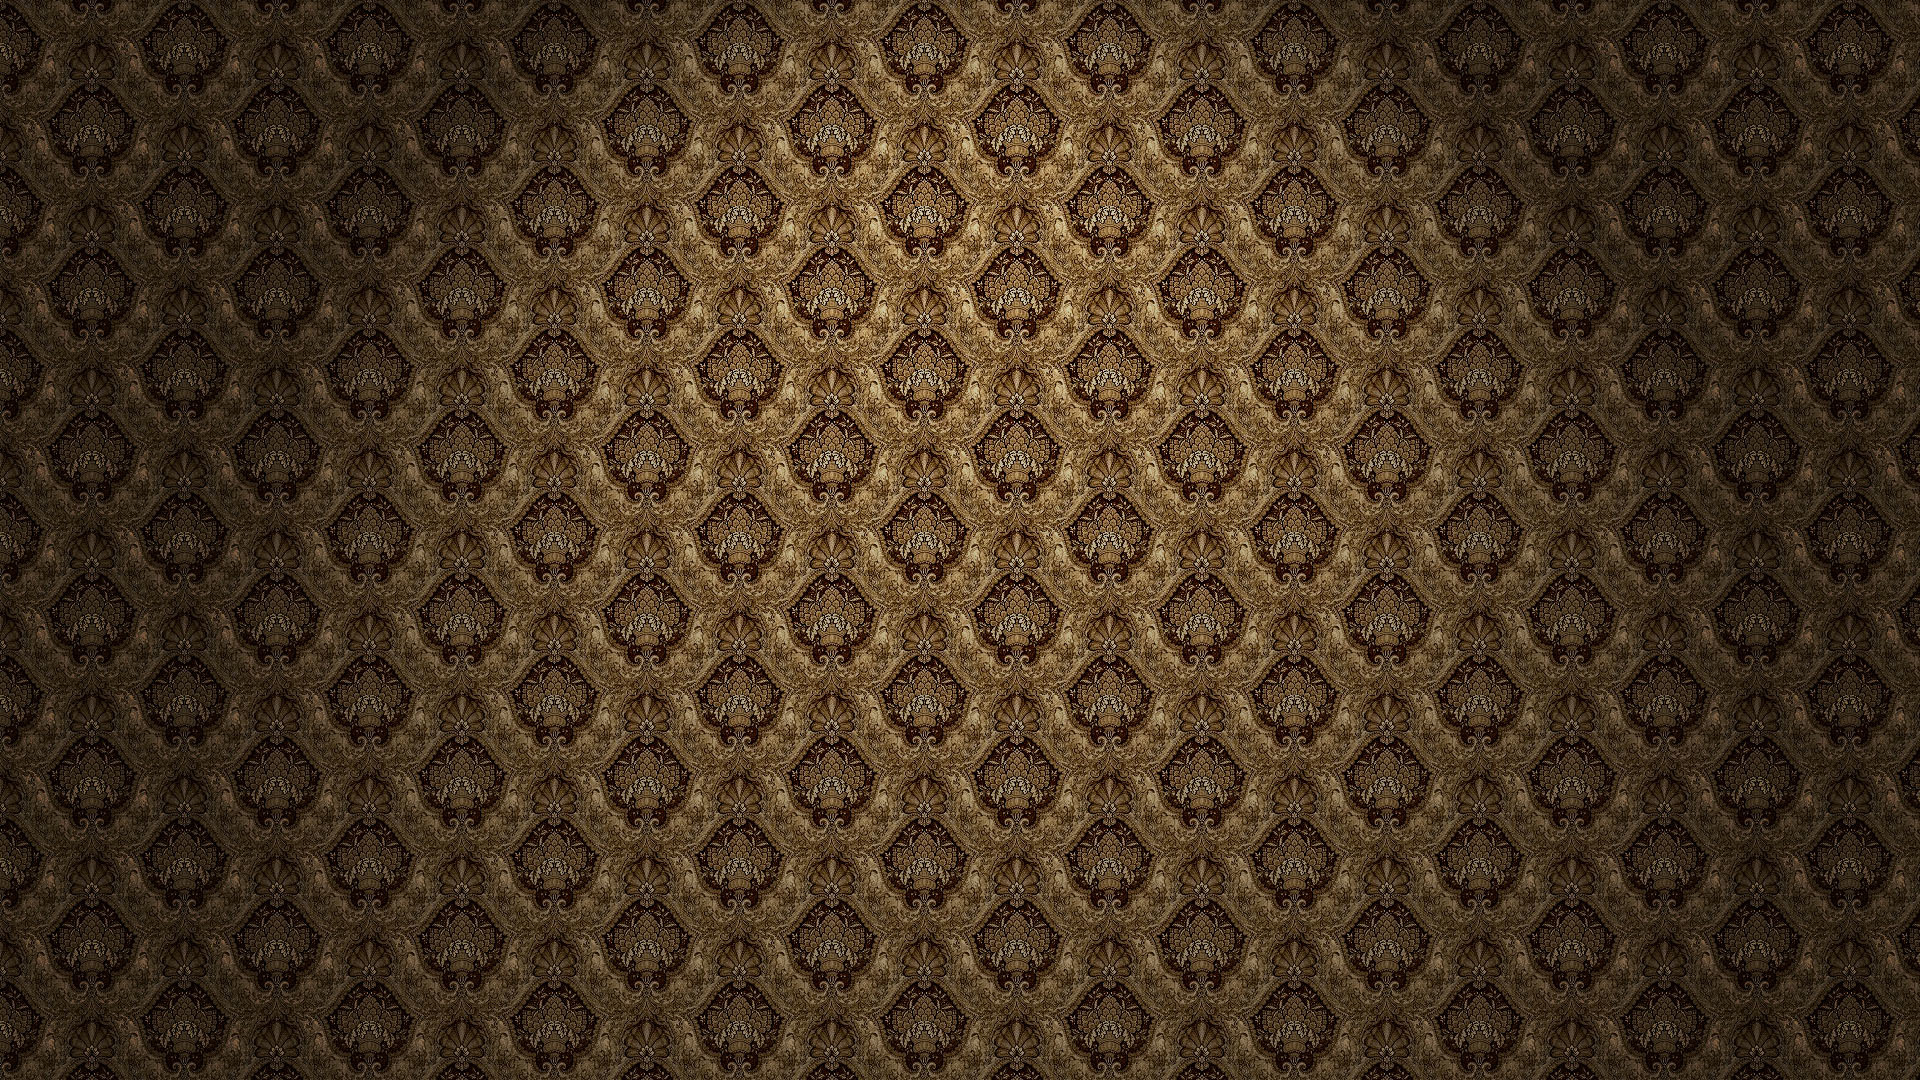 Black and Gold Wallpaper 27068 1920x1080px